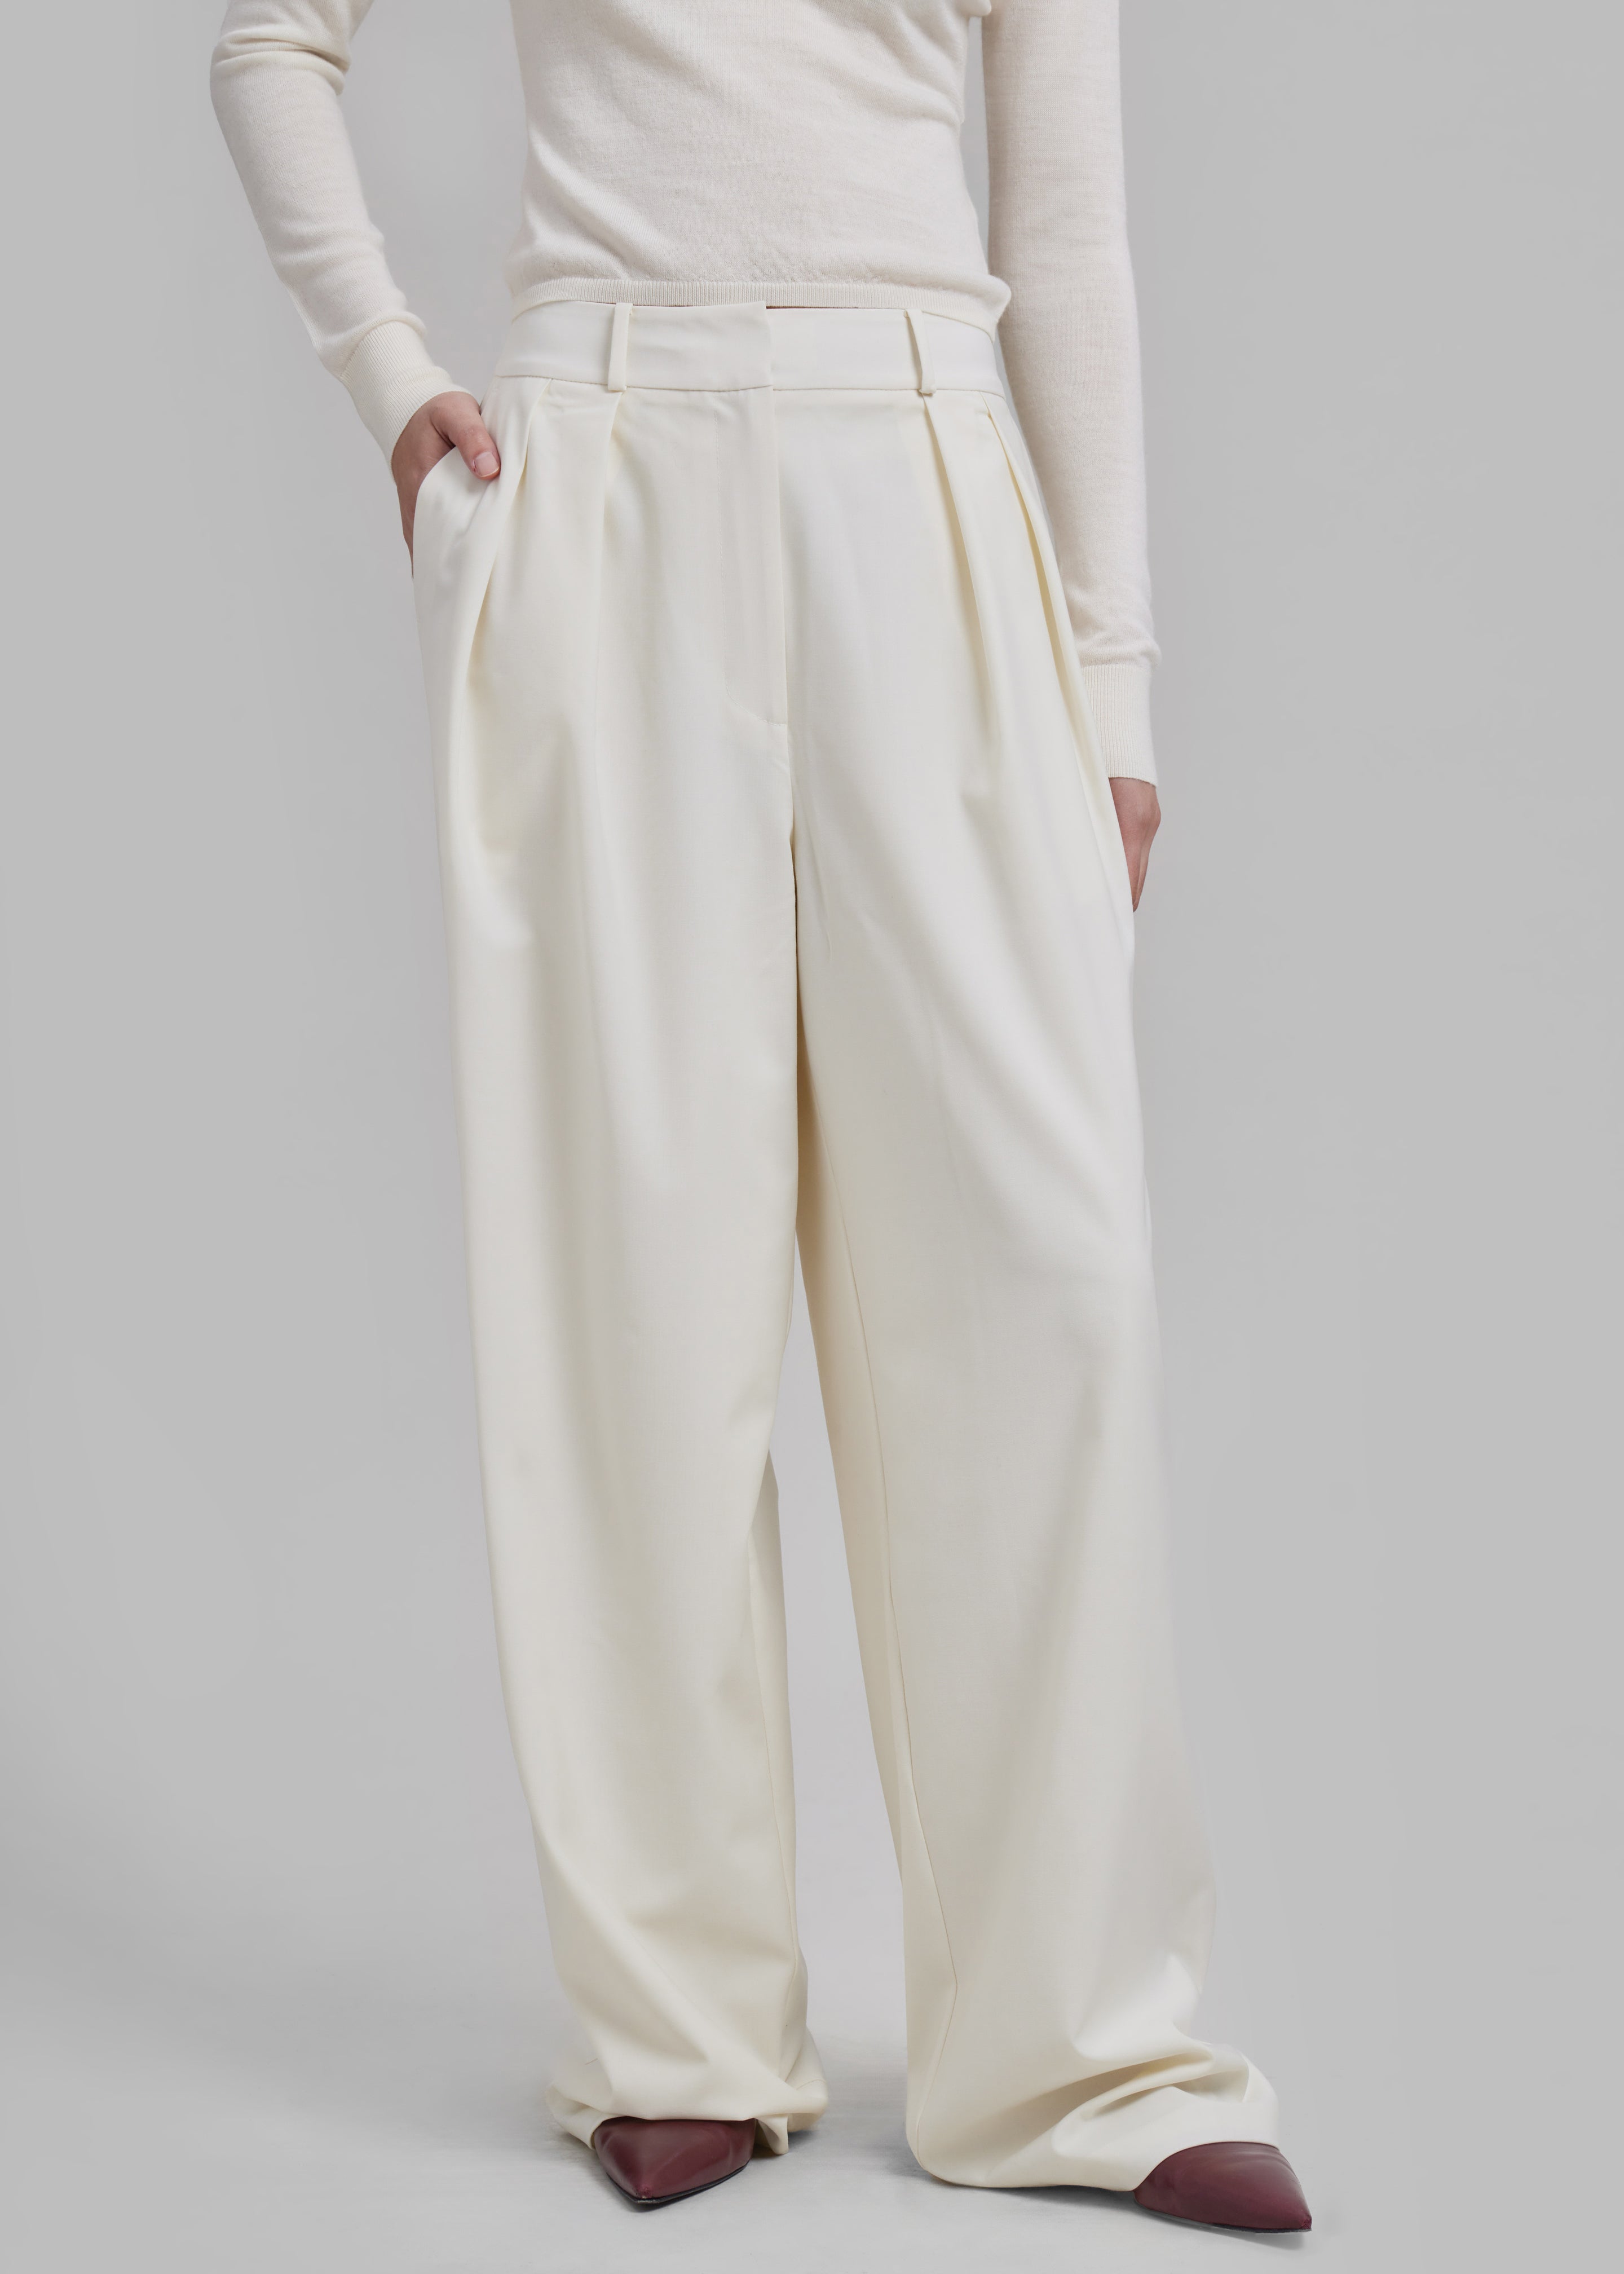 Ripley Pleated Trousers - Ivory - 2